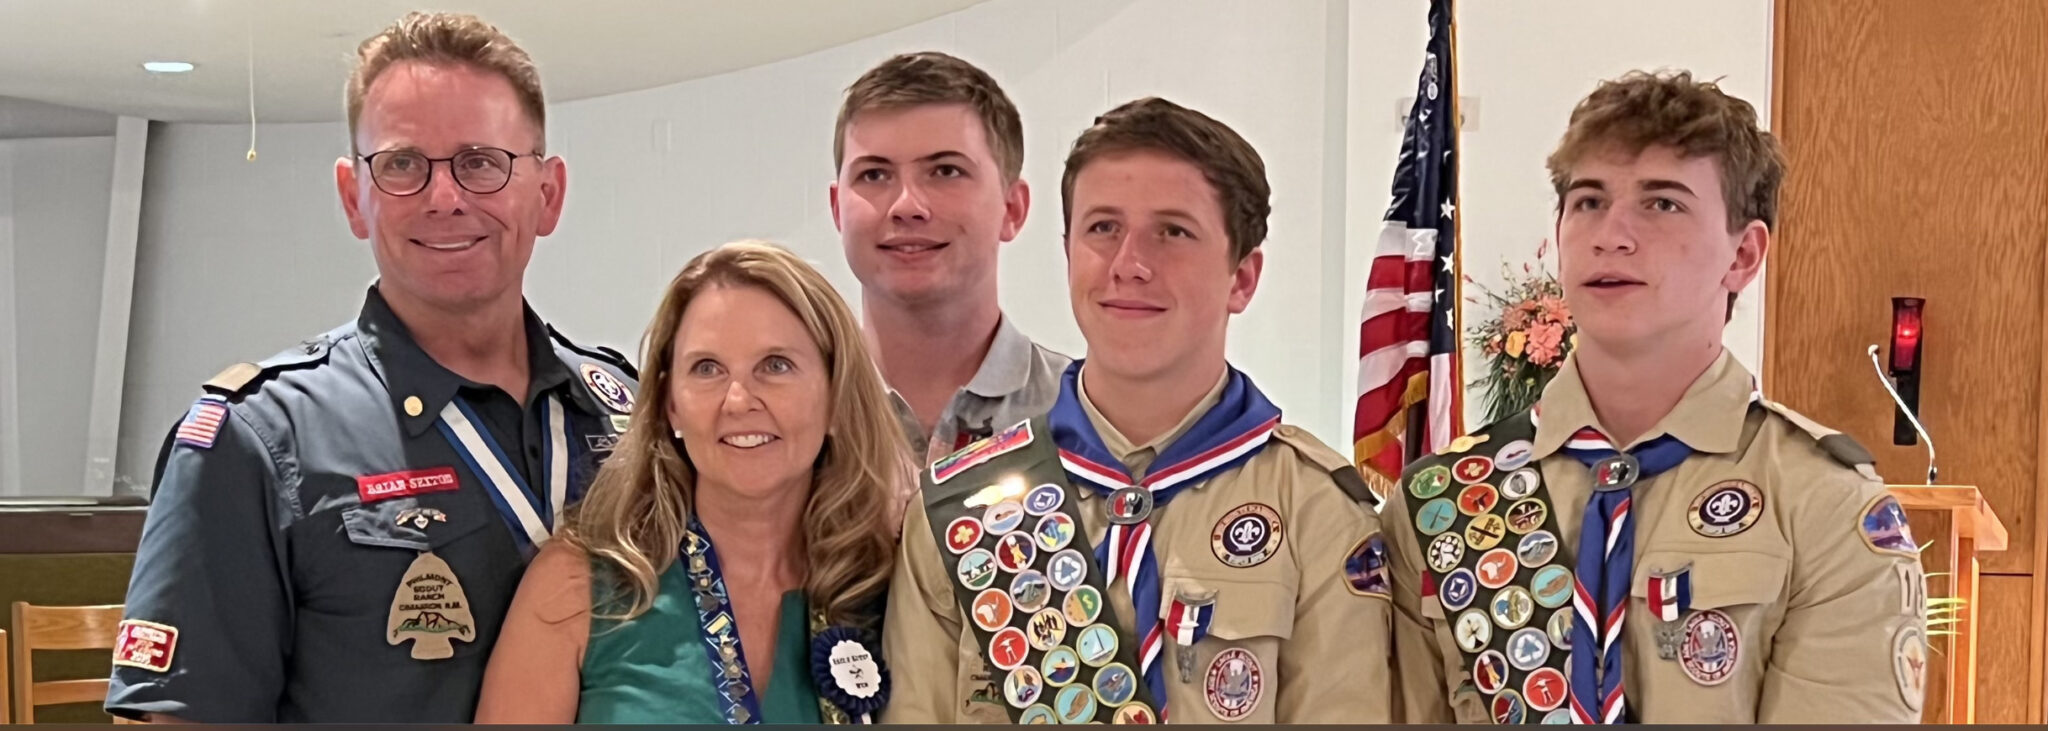 Brian Sexton Boy Scout and Family